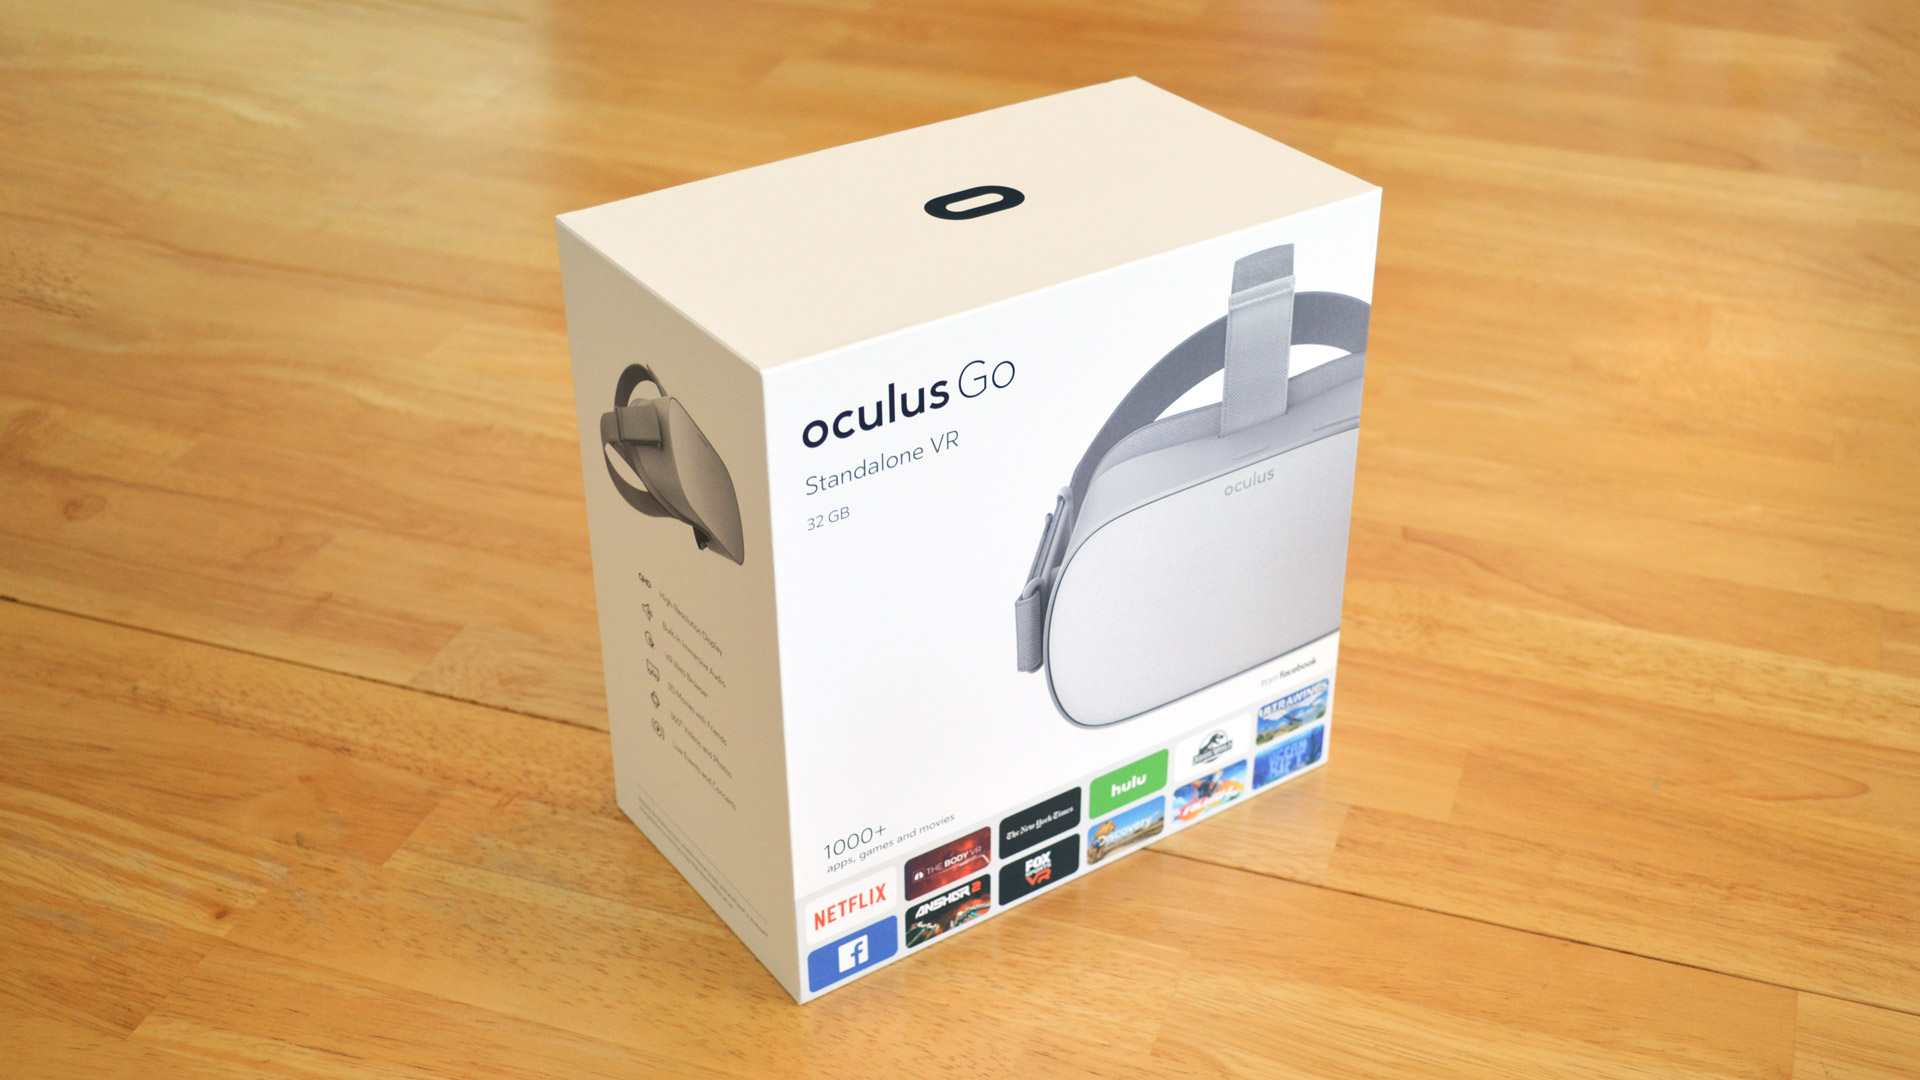 oculus go for xbox one